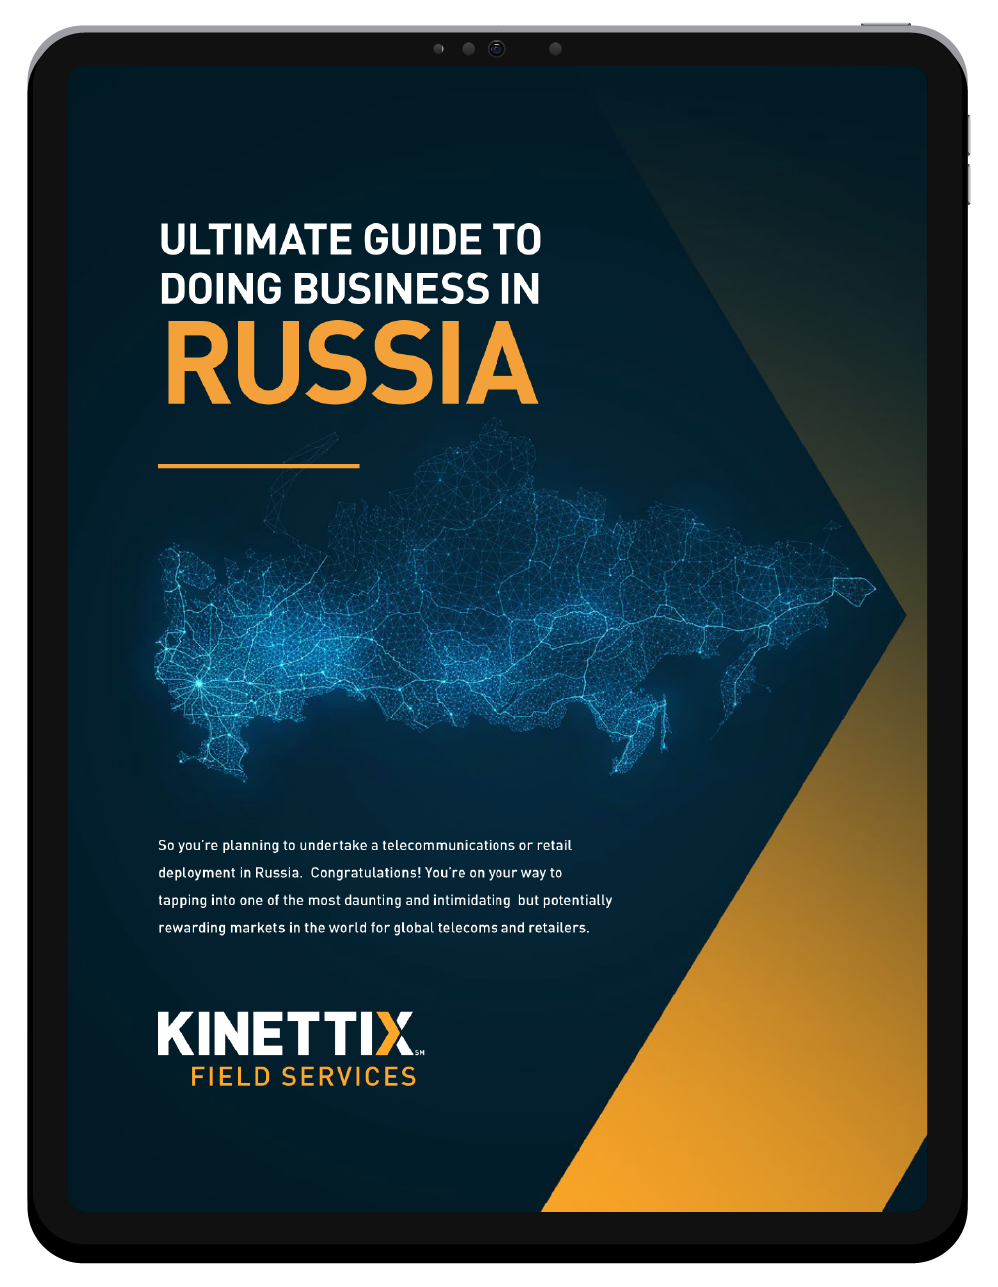 KNTX_Business-In-Russia-Guide-tabletx1